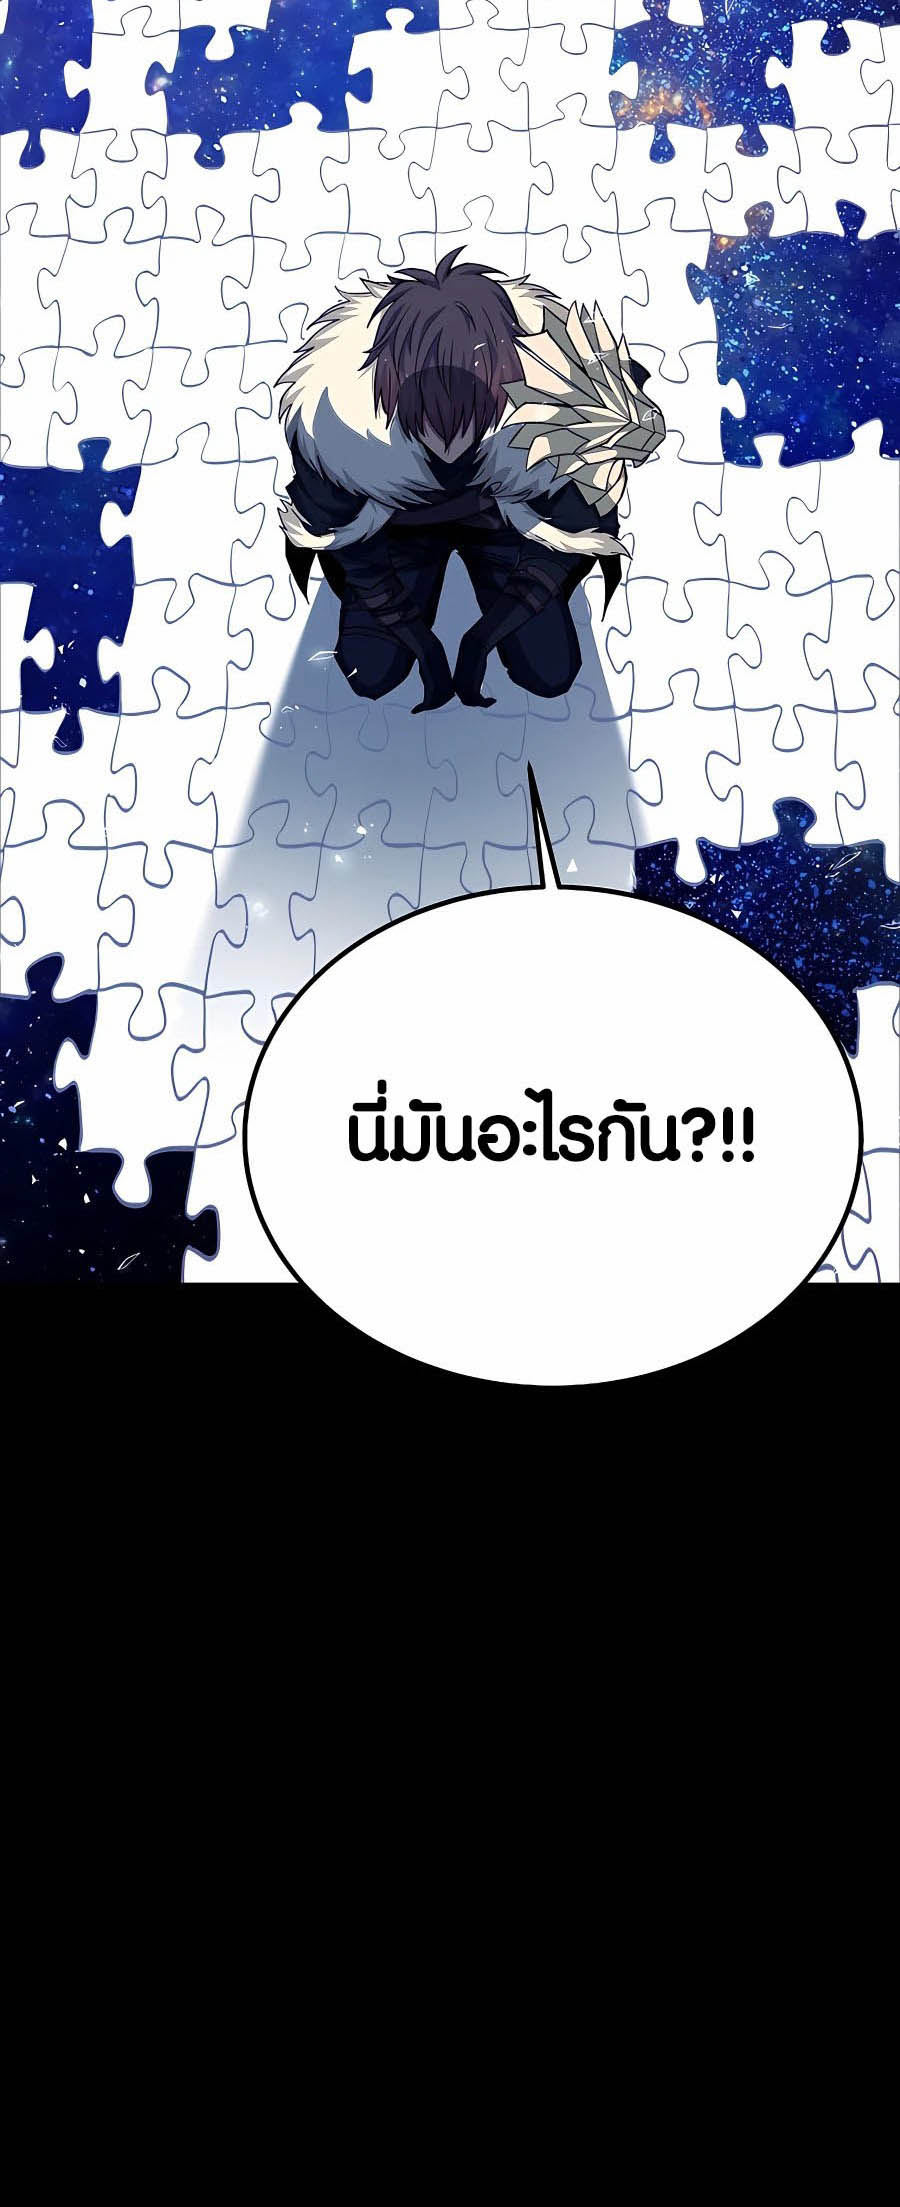 à¸­à¹ˆà¸²à¸™à¸¡à¸±à¸™à¸®à¸§à¸² à¹€à¸£à¸·à¹ˆà¸­à¸‡ The Part Time Land of the Gods 55 34